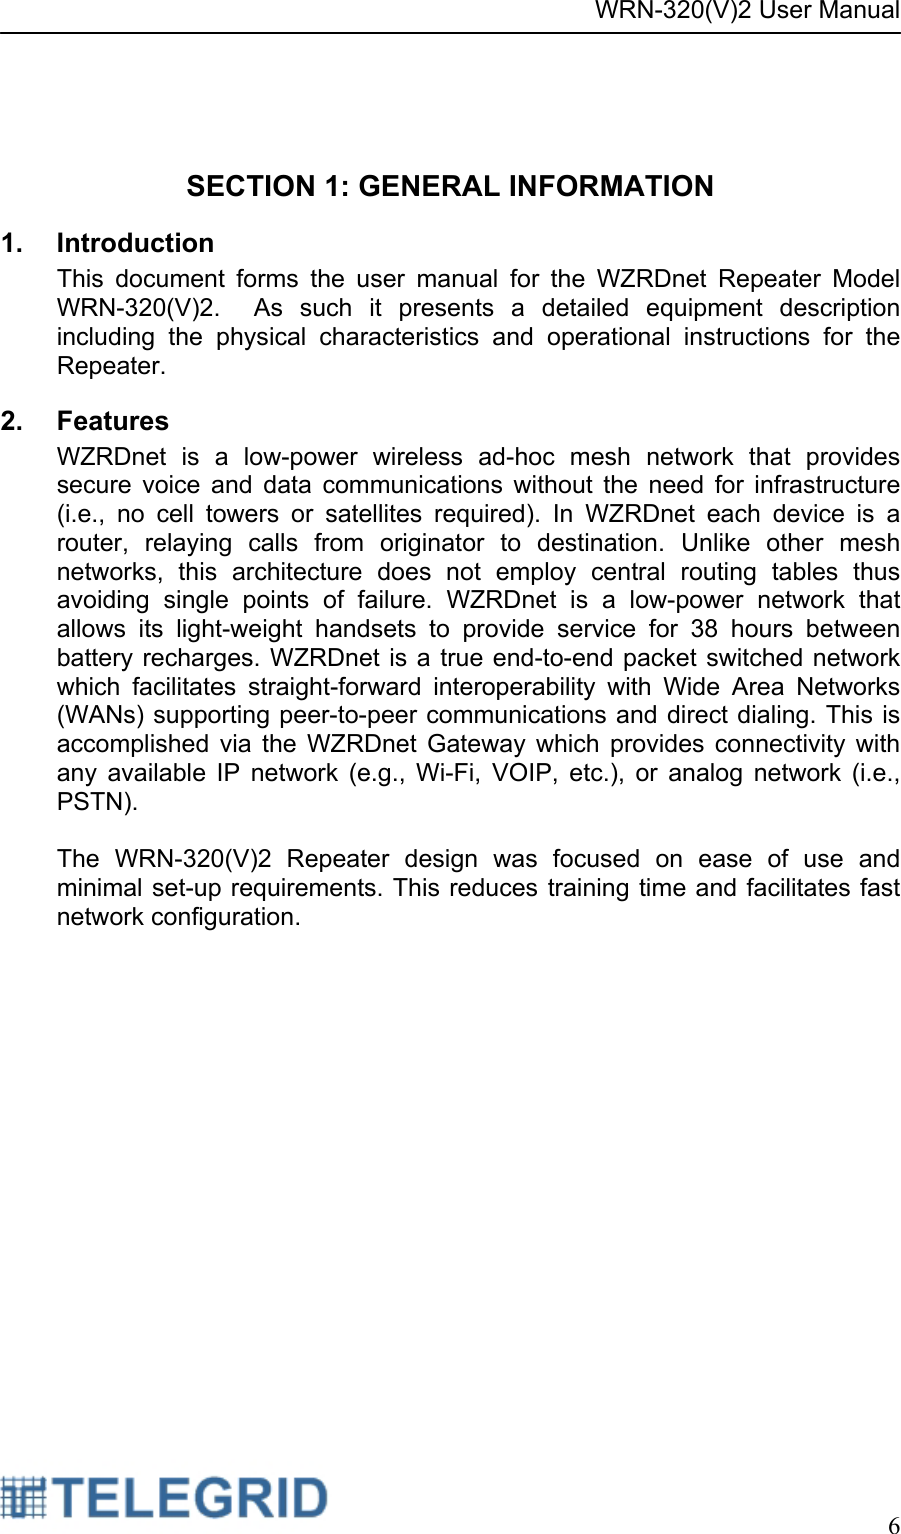 WRN-320(V)2 User Manual     6    SECTION 1: GENERAL INFORMATION 1. Introduction This document forms the user manual for the WZRDnet Repeater Model WRN-320(V)2.  As such it presents a detailed equipment description including the physical characteristics and operational instructions for the Repeater. 2. Features WZRDnet is a low-power wireless ad-hoc mesh network that provides secure voice and data communications without the need for infrastructure (i.e., no cell towers or satellites required). In WZRDnet each device is a router, relaying calls from originator to destination. Unlike other mesh networks, this architecture does not employ central routing tables thus avoiding single points of failure. WZRDnet is a low-power network that allows its light-weight handsets to provide service for 38 hours between battery recharges. WZRDnet is a true end-to-end packet switched network which facilitates straight-forward interoperability with Wide Area Networks (WANs) supporting peer-to-peer communications and direct dialing. This is accomplished via the WZRDnet Gateway which provides connectivity with any available IP network (e.g., Wi-Fi, VOIP, etc.), or analog network (i.e., PSTN).  The WRN-320(V)2 Repeater design was focused on ease of use and minimal set-up requirements. This reduces training time and facilitates fast network configuration. 